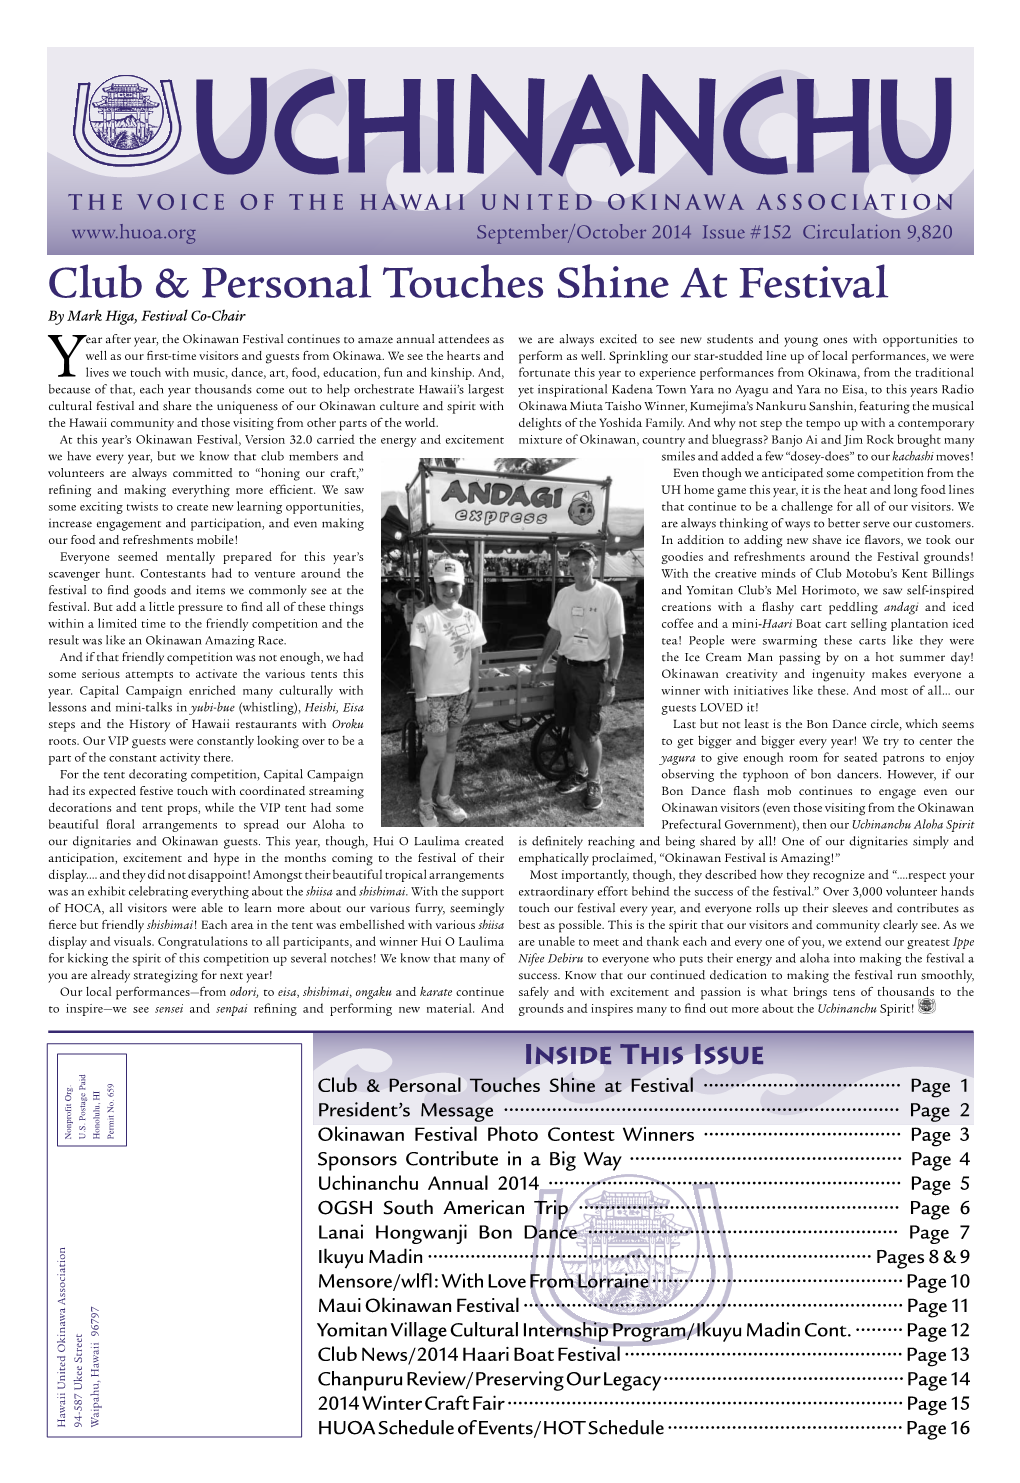 Club & Personal Touches Shine at Festival